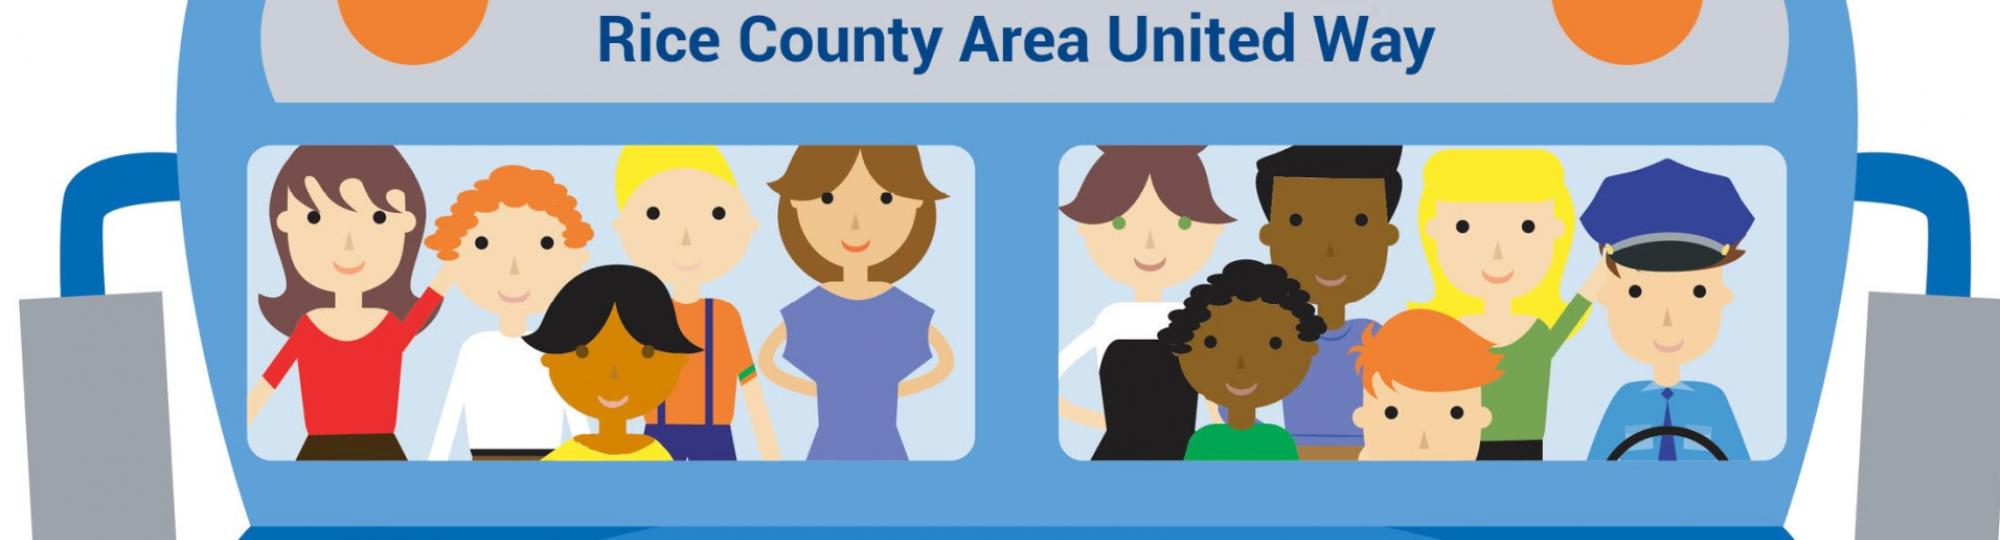 Cheerful illustration of the front windows of a blue bus with Rice County Area United Way's logo in the "destination" area. People of diverse appearance are seen through the windshield.